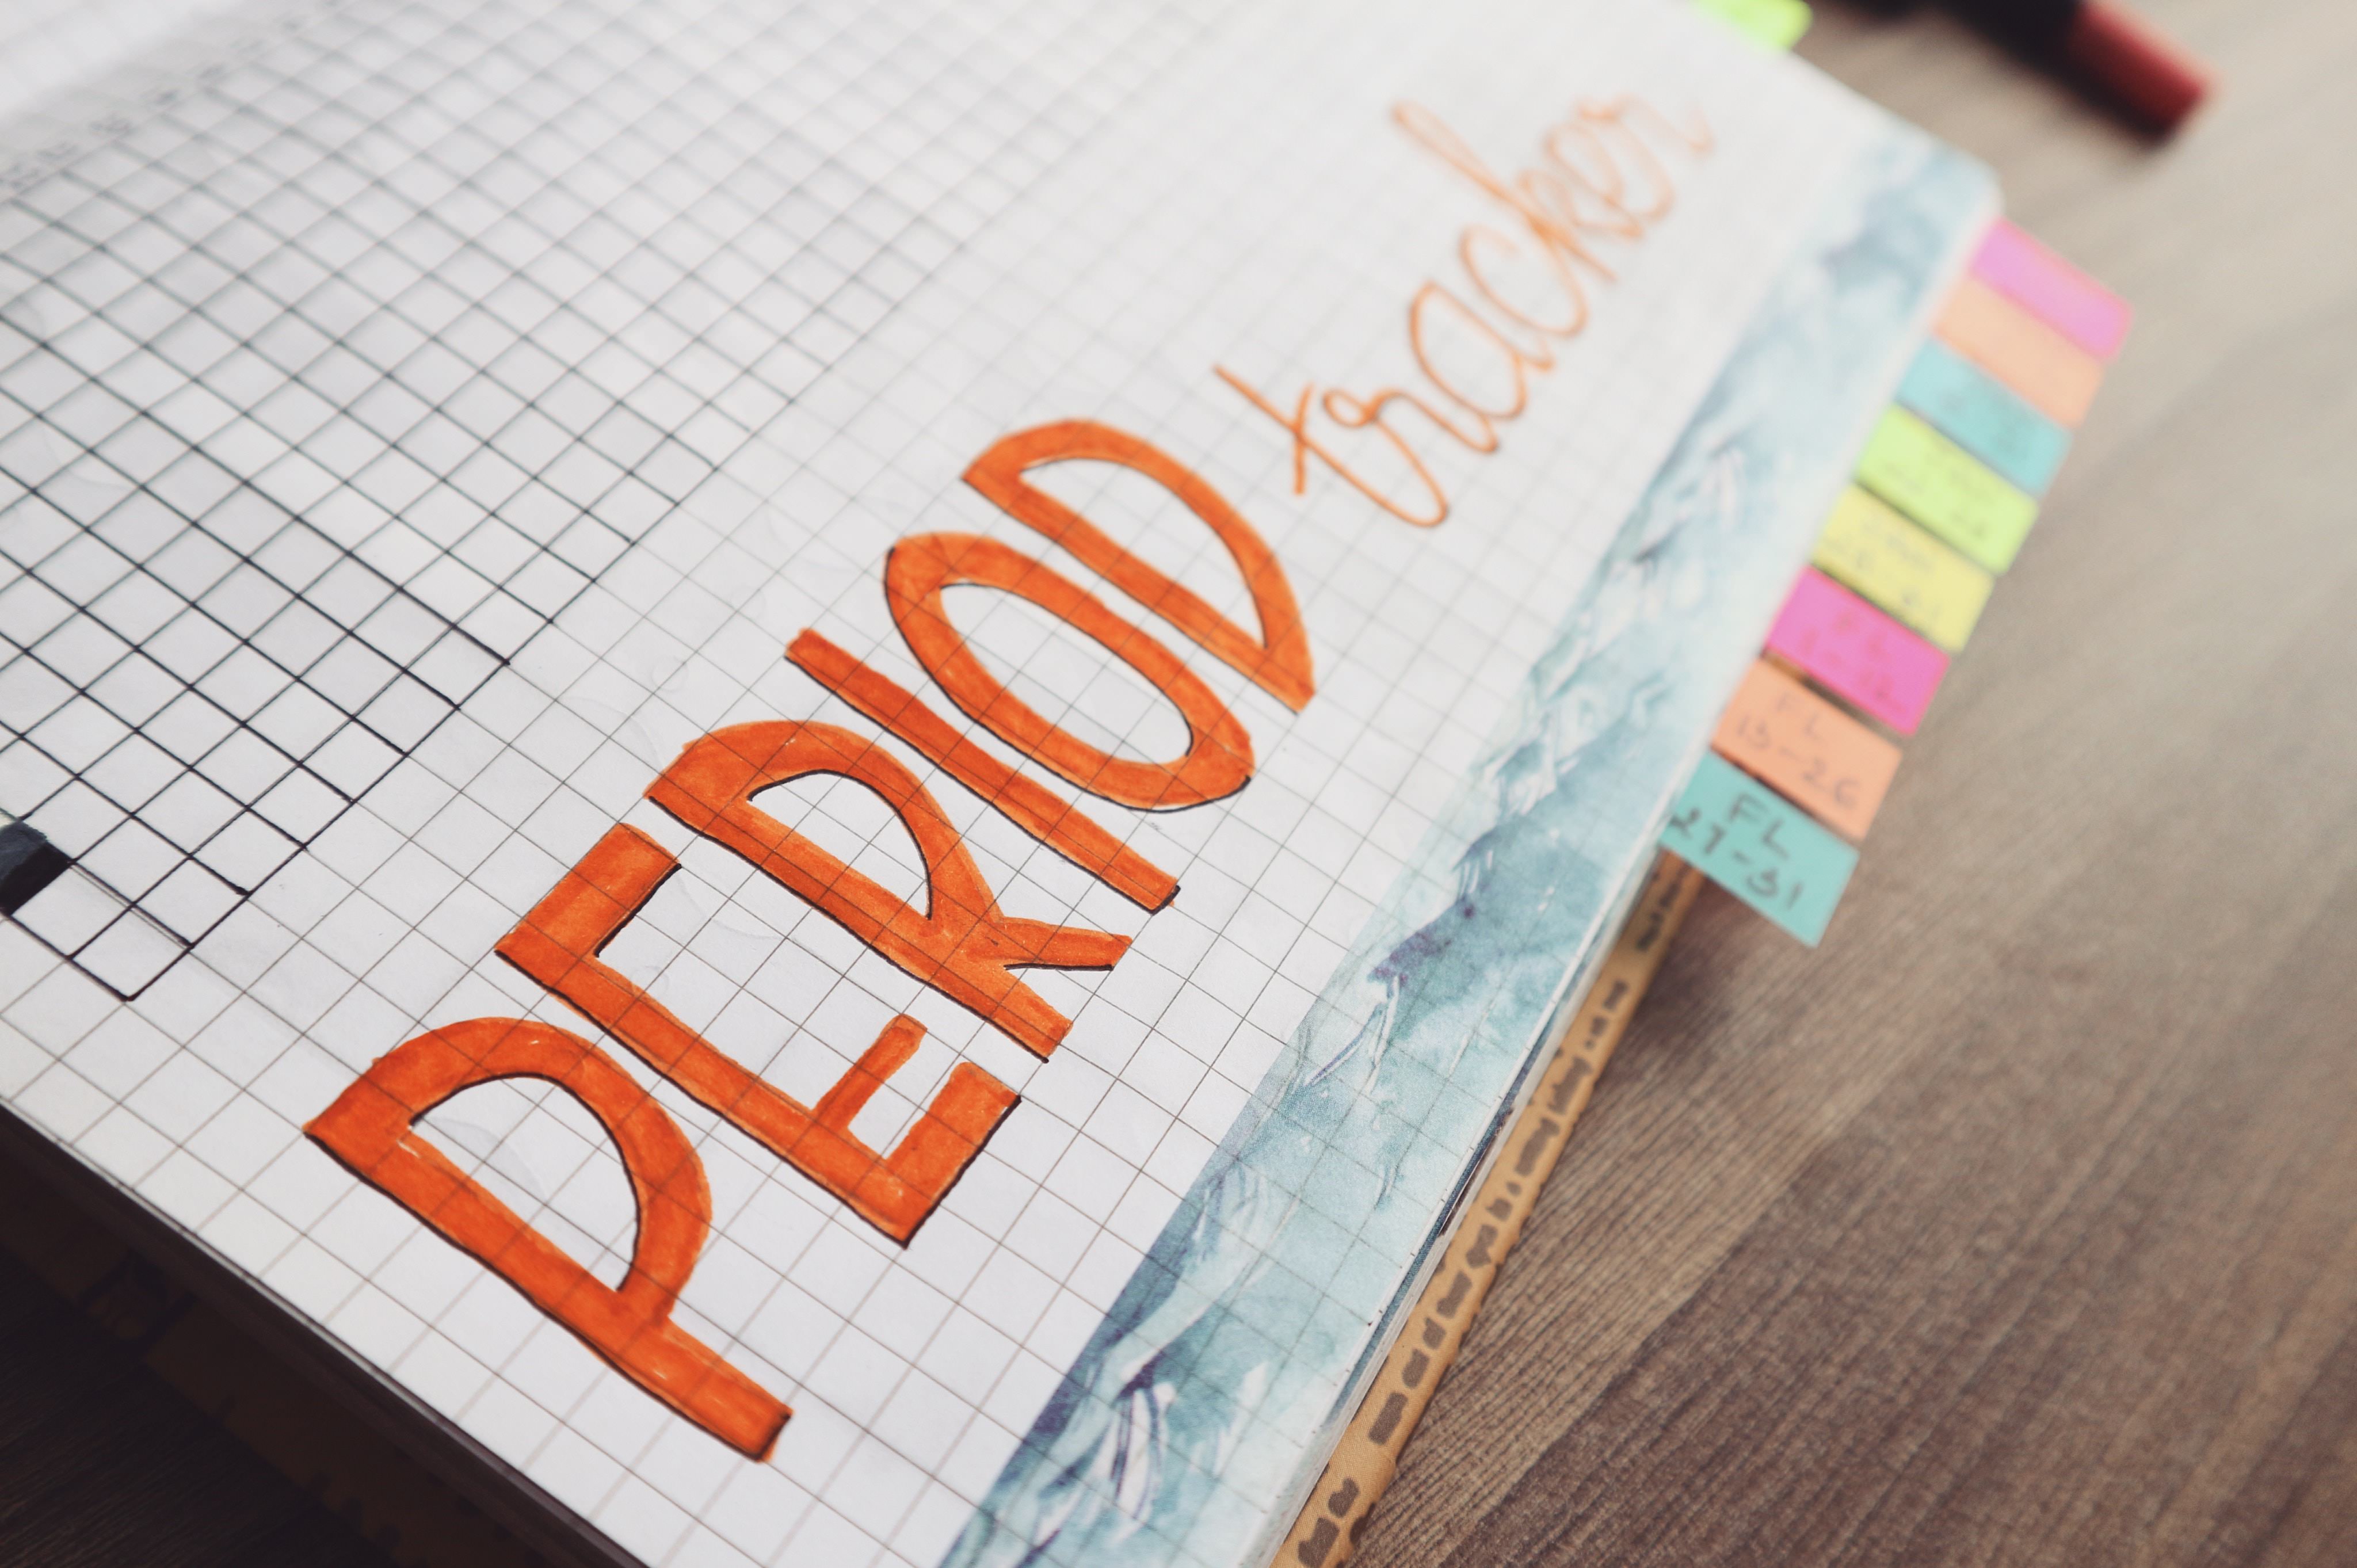 Image of period tracker